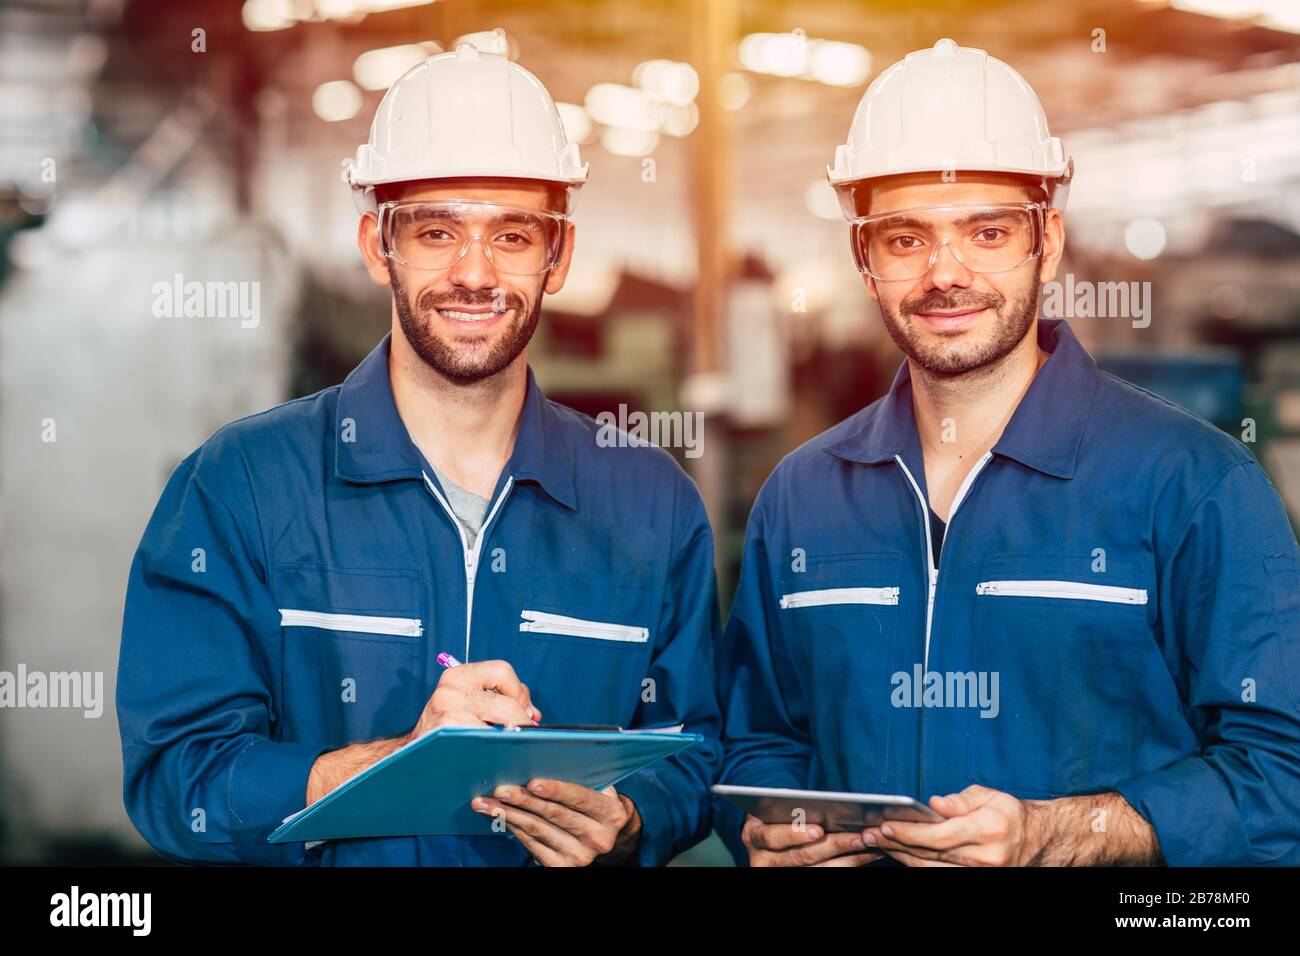 Portrait of happy engineer teamwork smiling looking at camera. Stock Photo